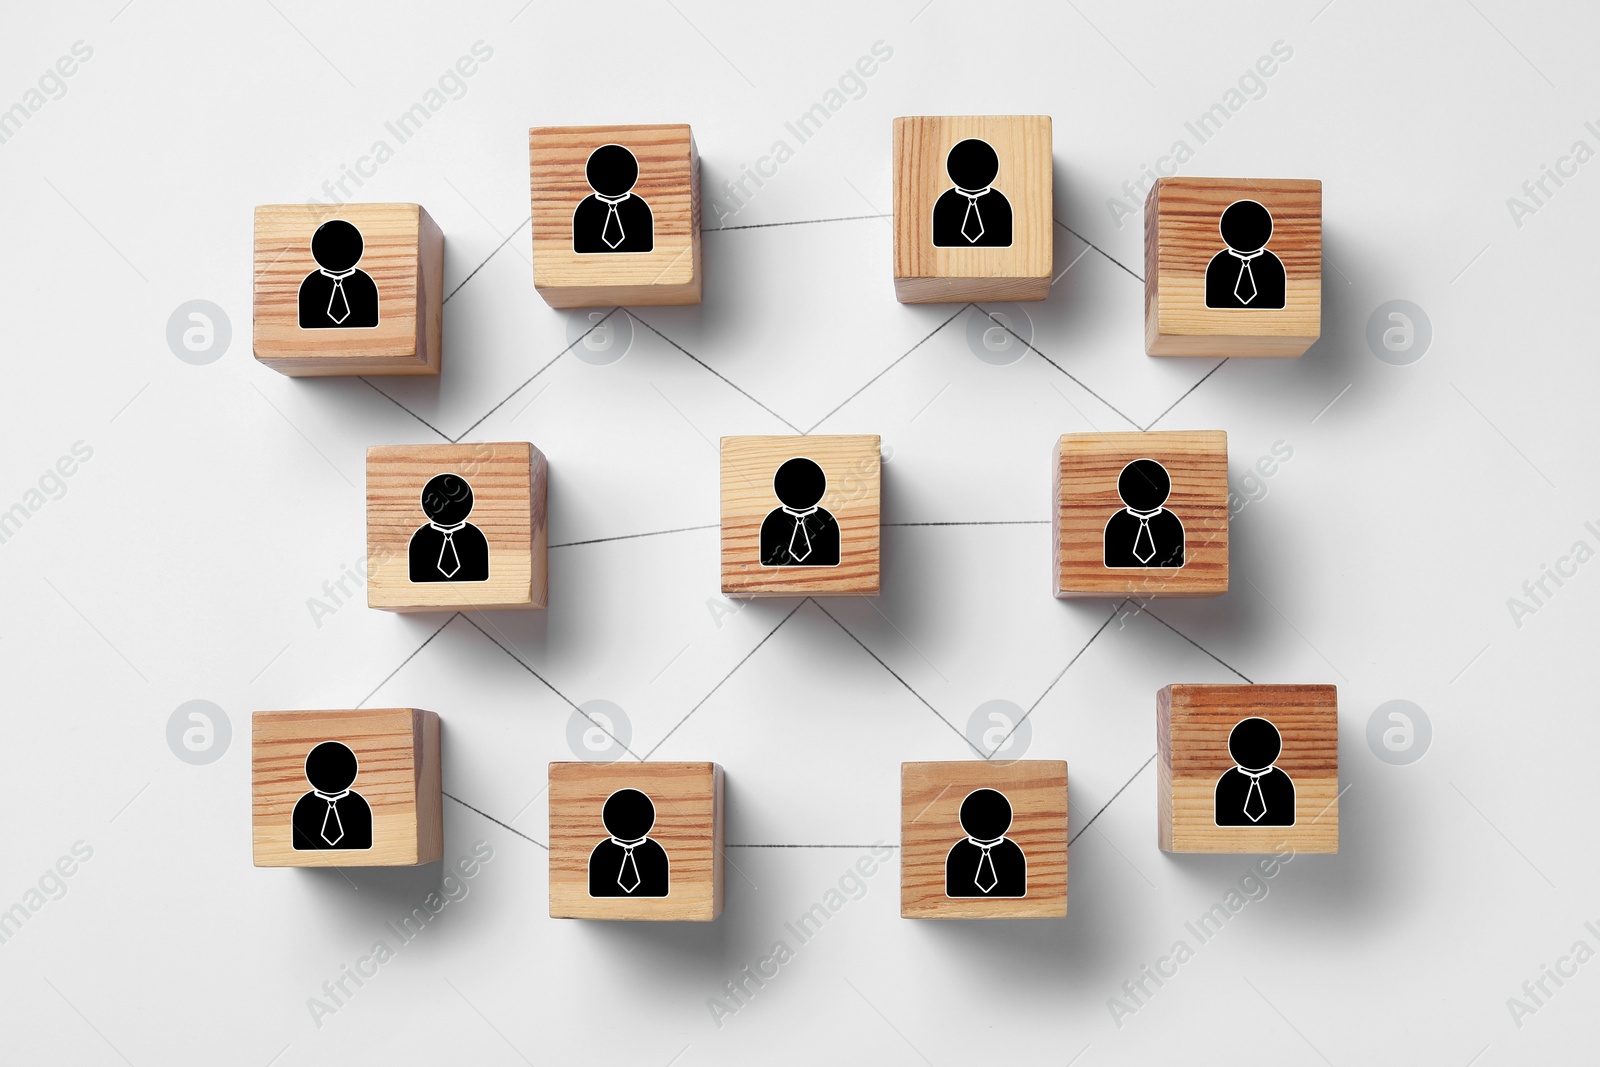 Image of Teamwork. Wooden cubes with human icons linked together symbolizing cooperation on white background, top view